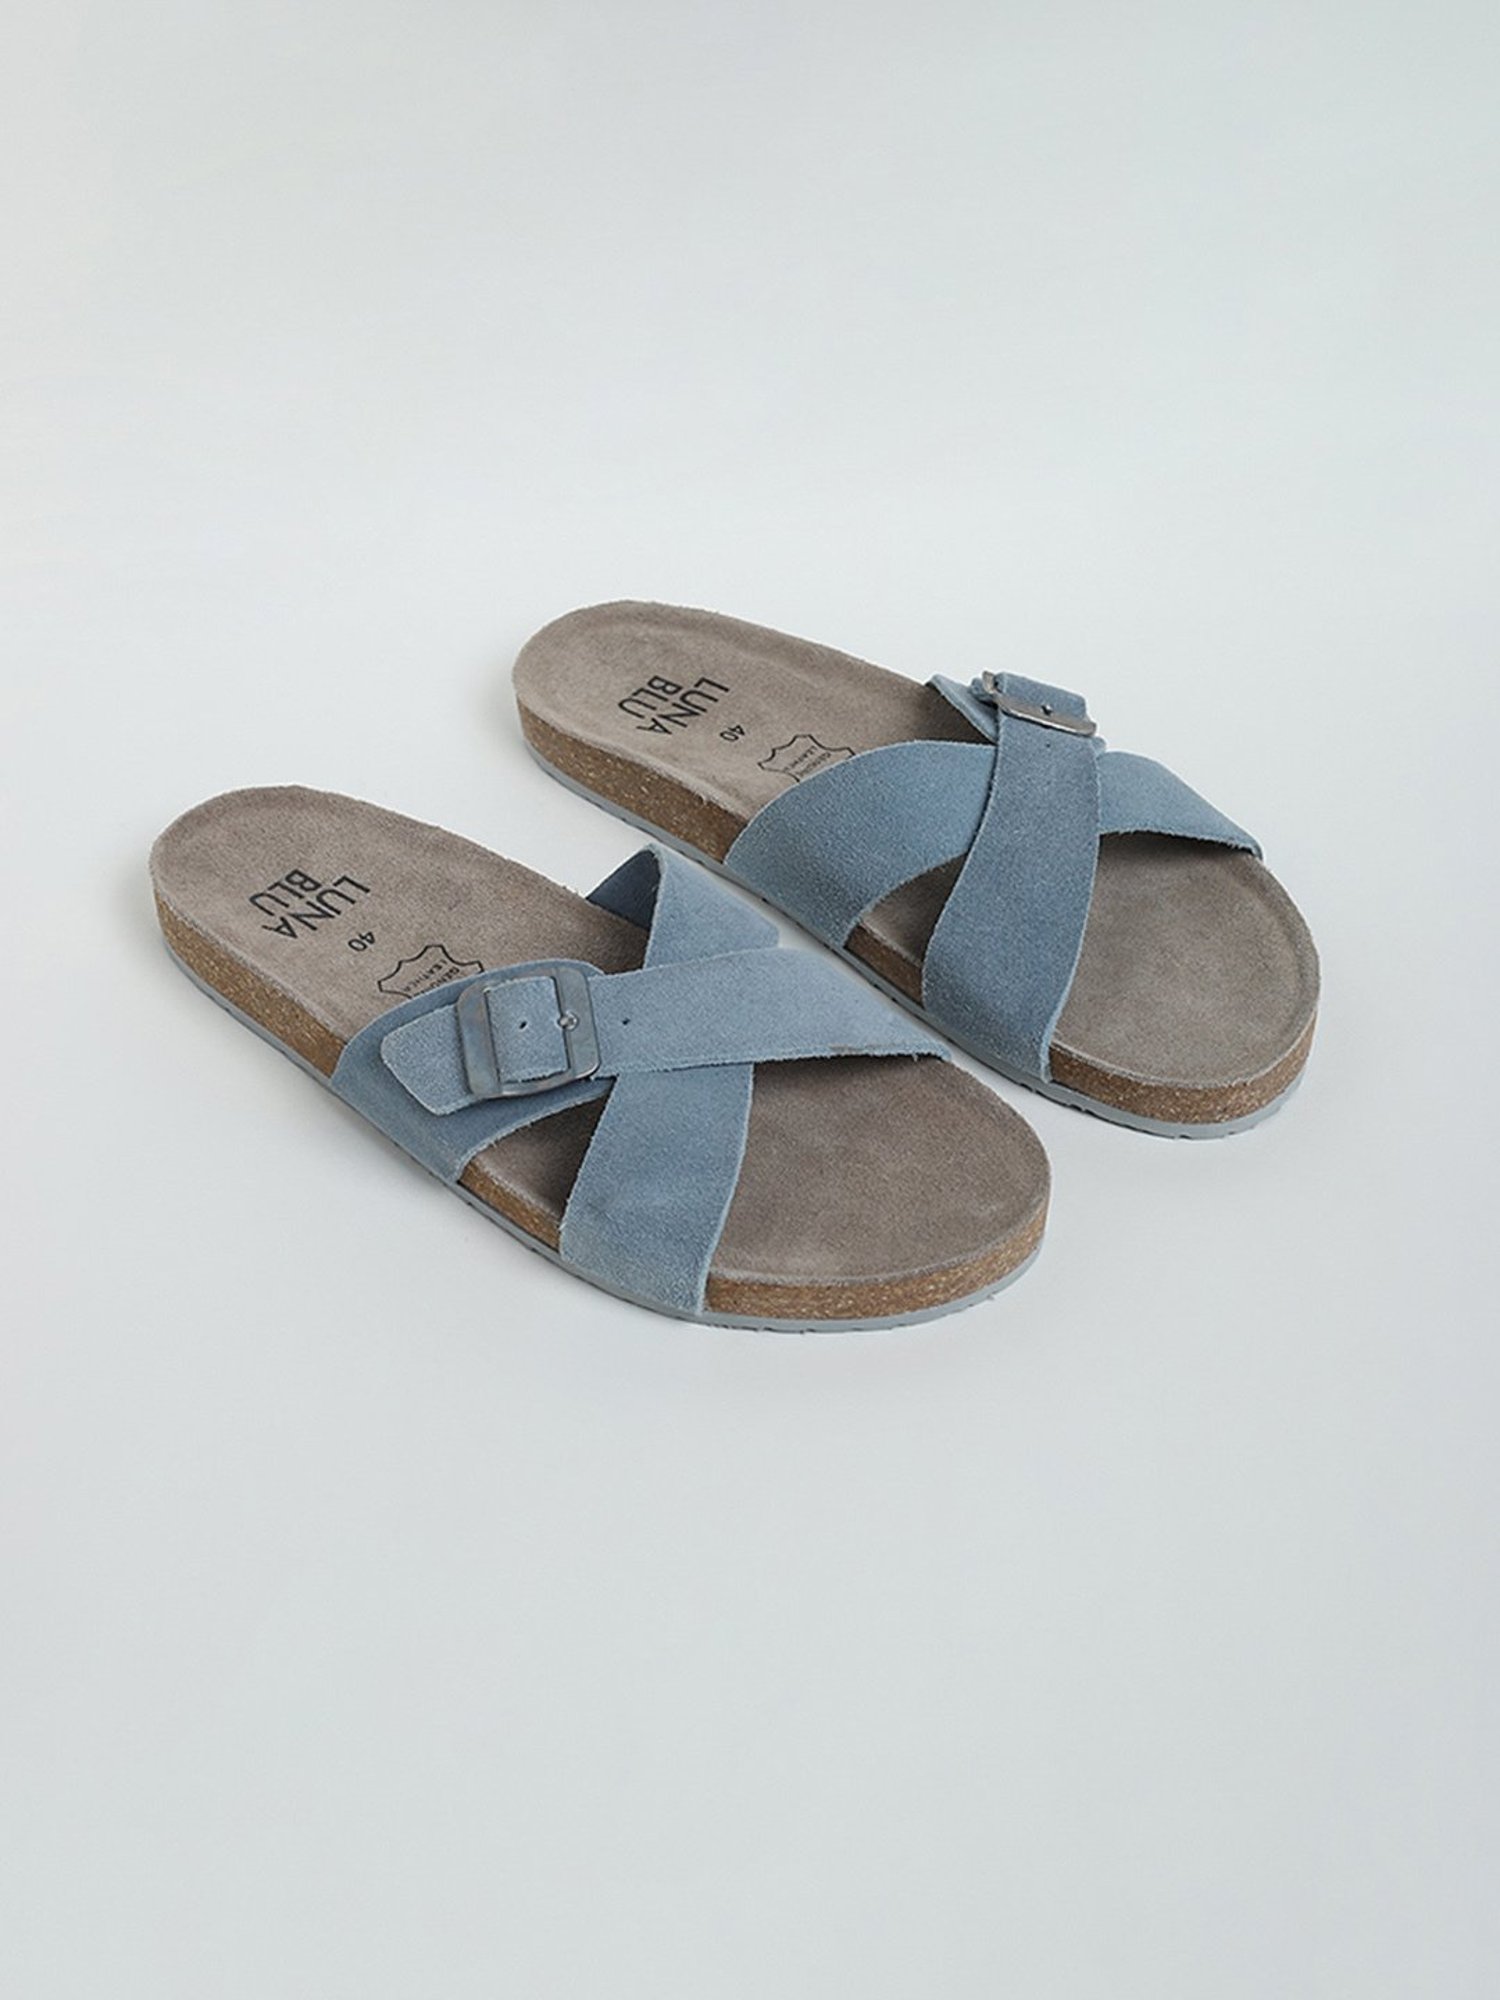 MARINA LUNA Blue LEATHER Wedges Slides Sandals Women Size 6.5 Made in Italy  | eBay